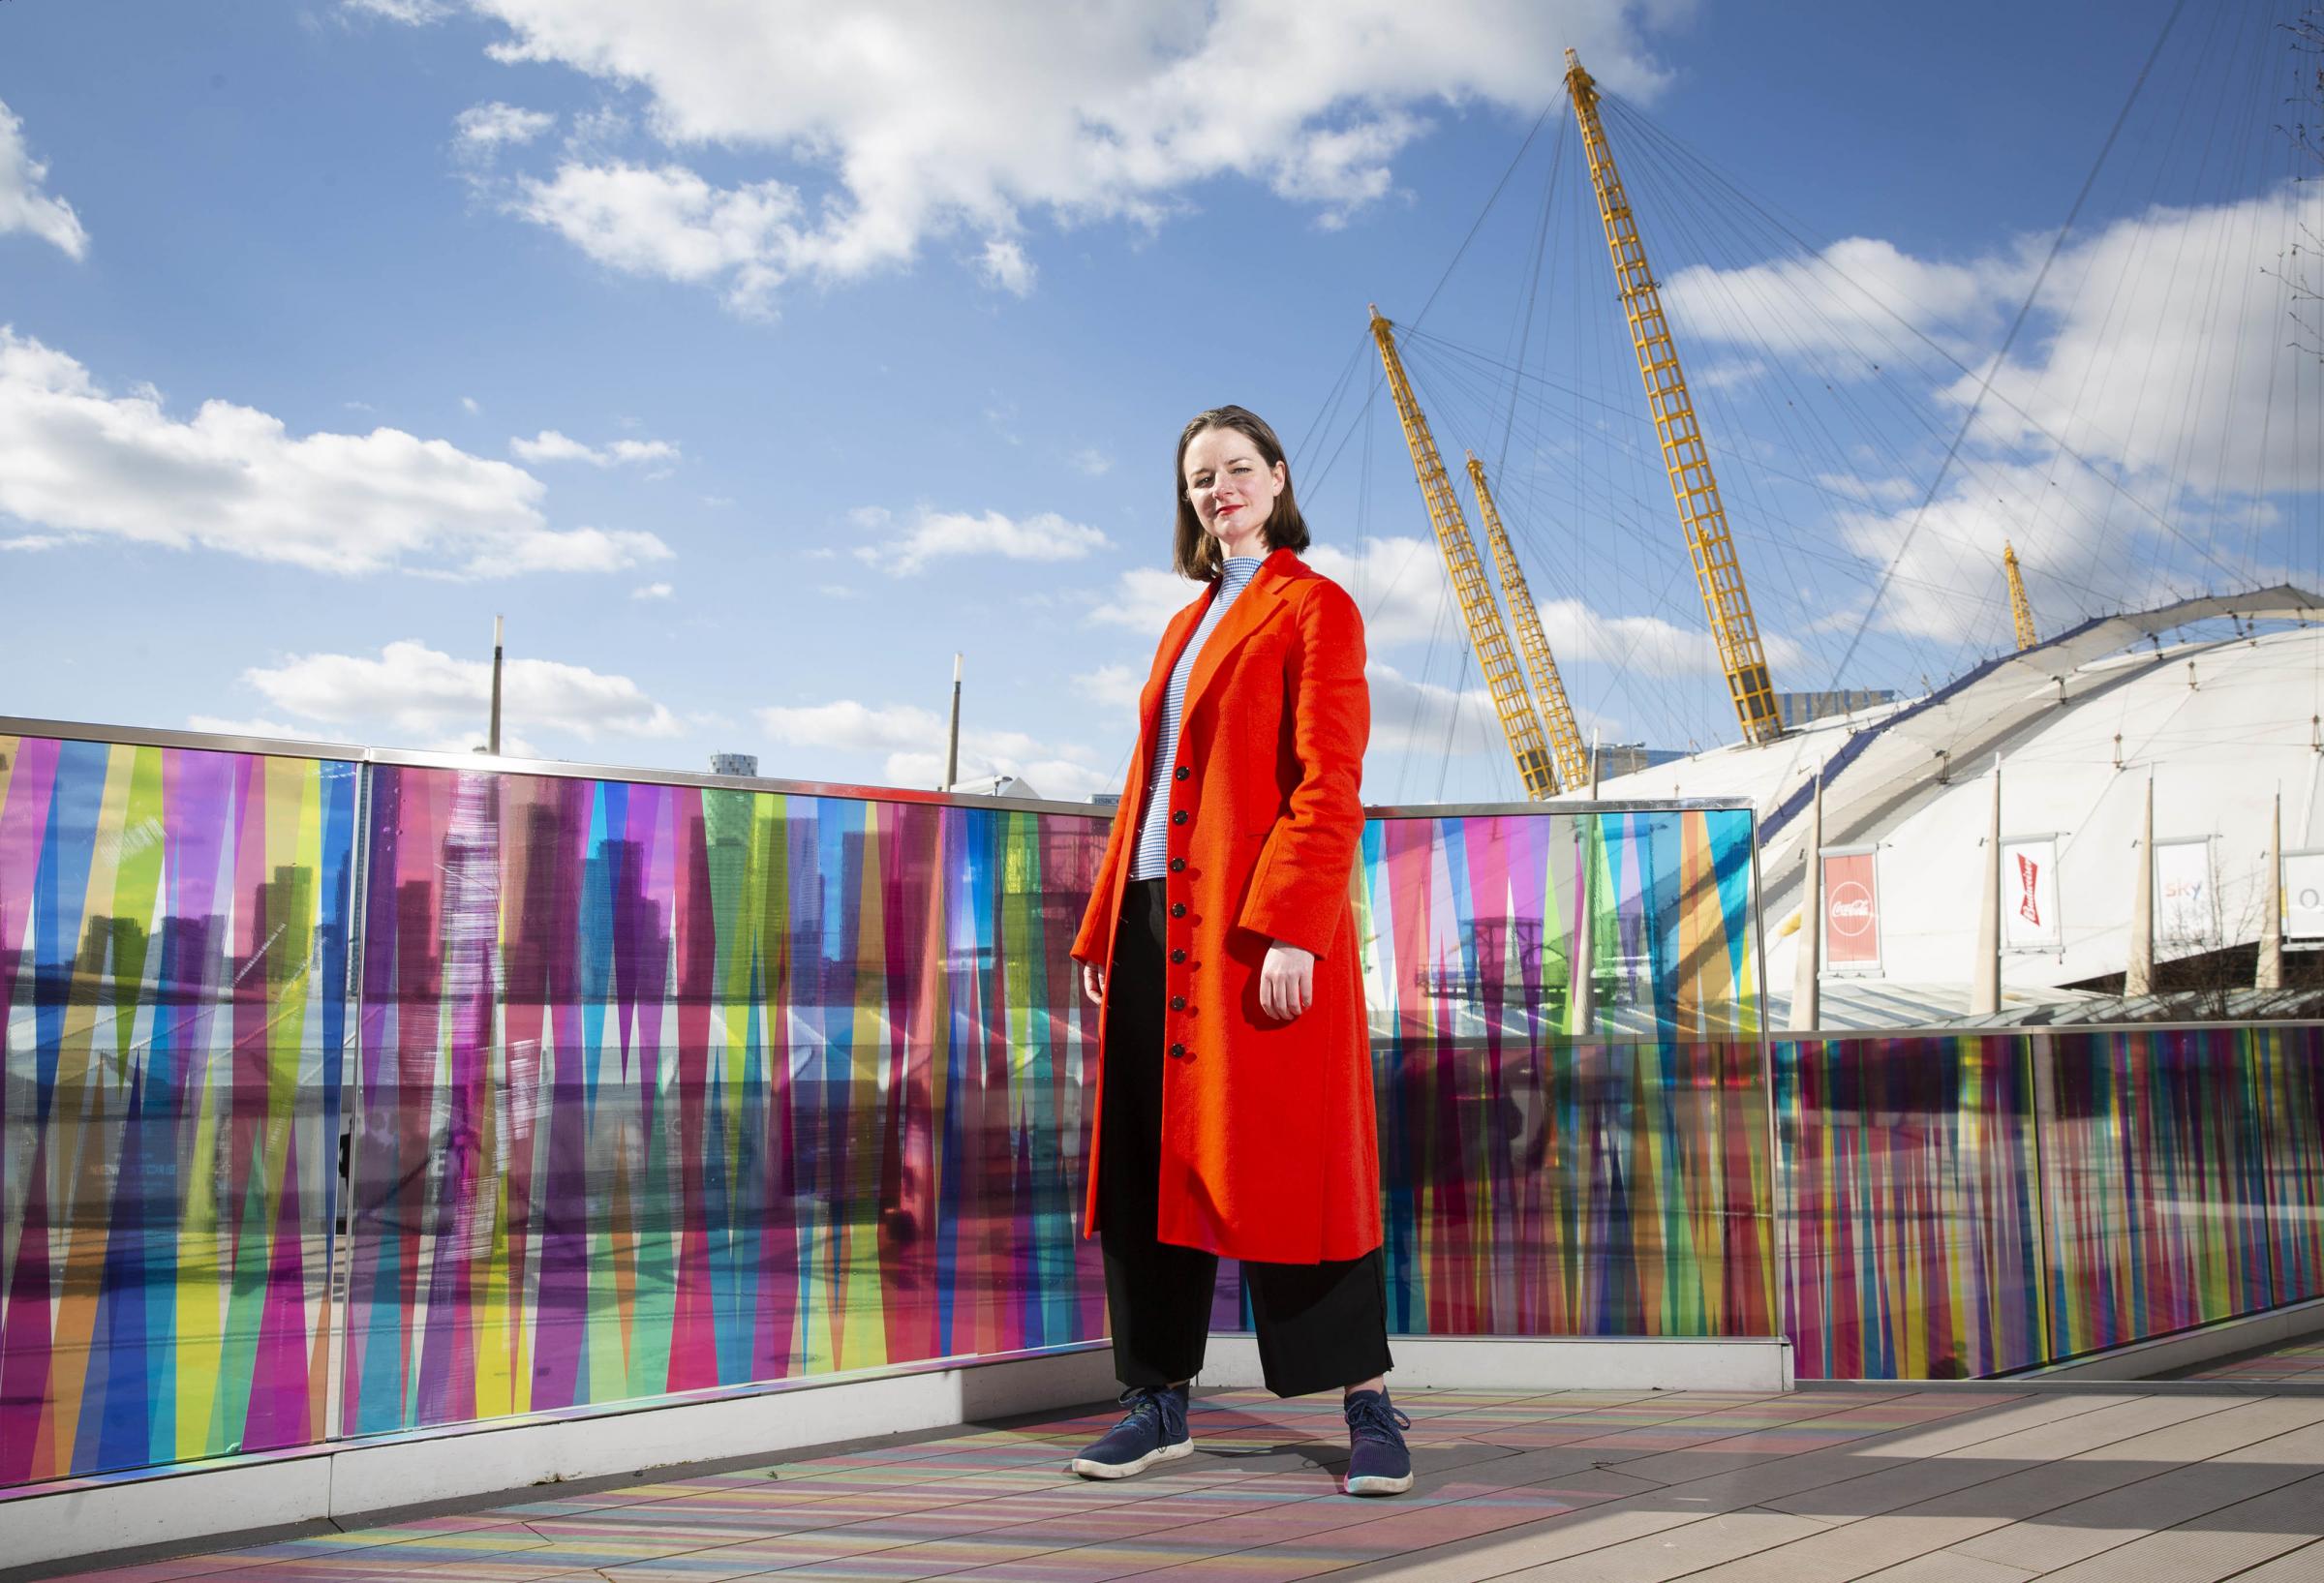 An art installation entitled Hundreds and Thousands, by artist Liz West which has been commissioned by Greenwich Peninsula is unveiled by the riverside in Greenwich, London.